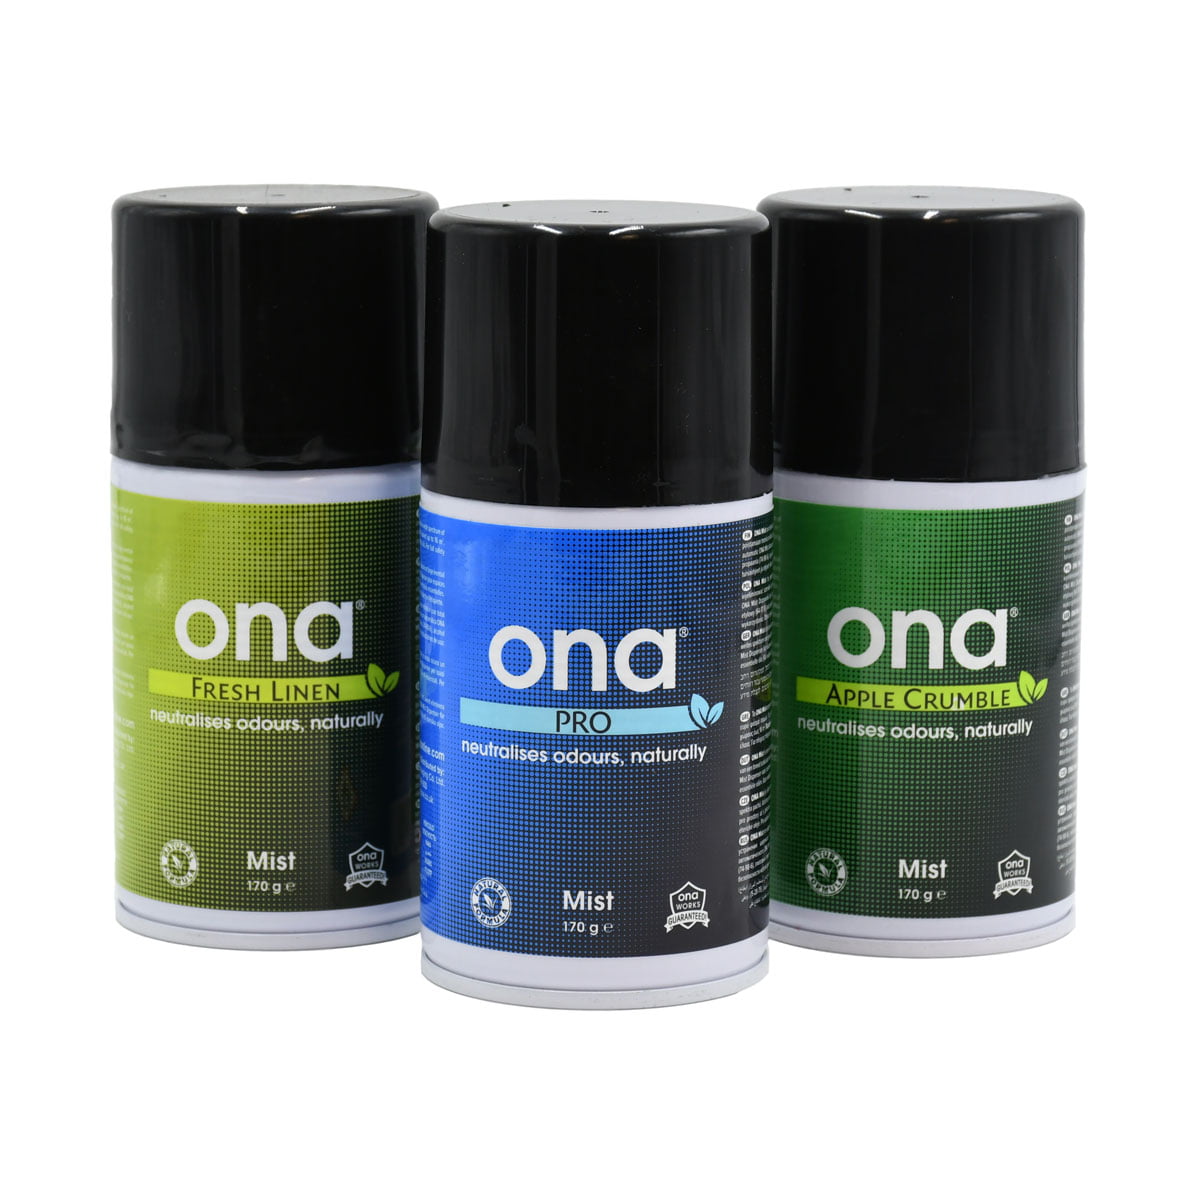 ONA Mist PRO Odour Neutraliser 170g Remove Odours Safely Naturally and Permanently